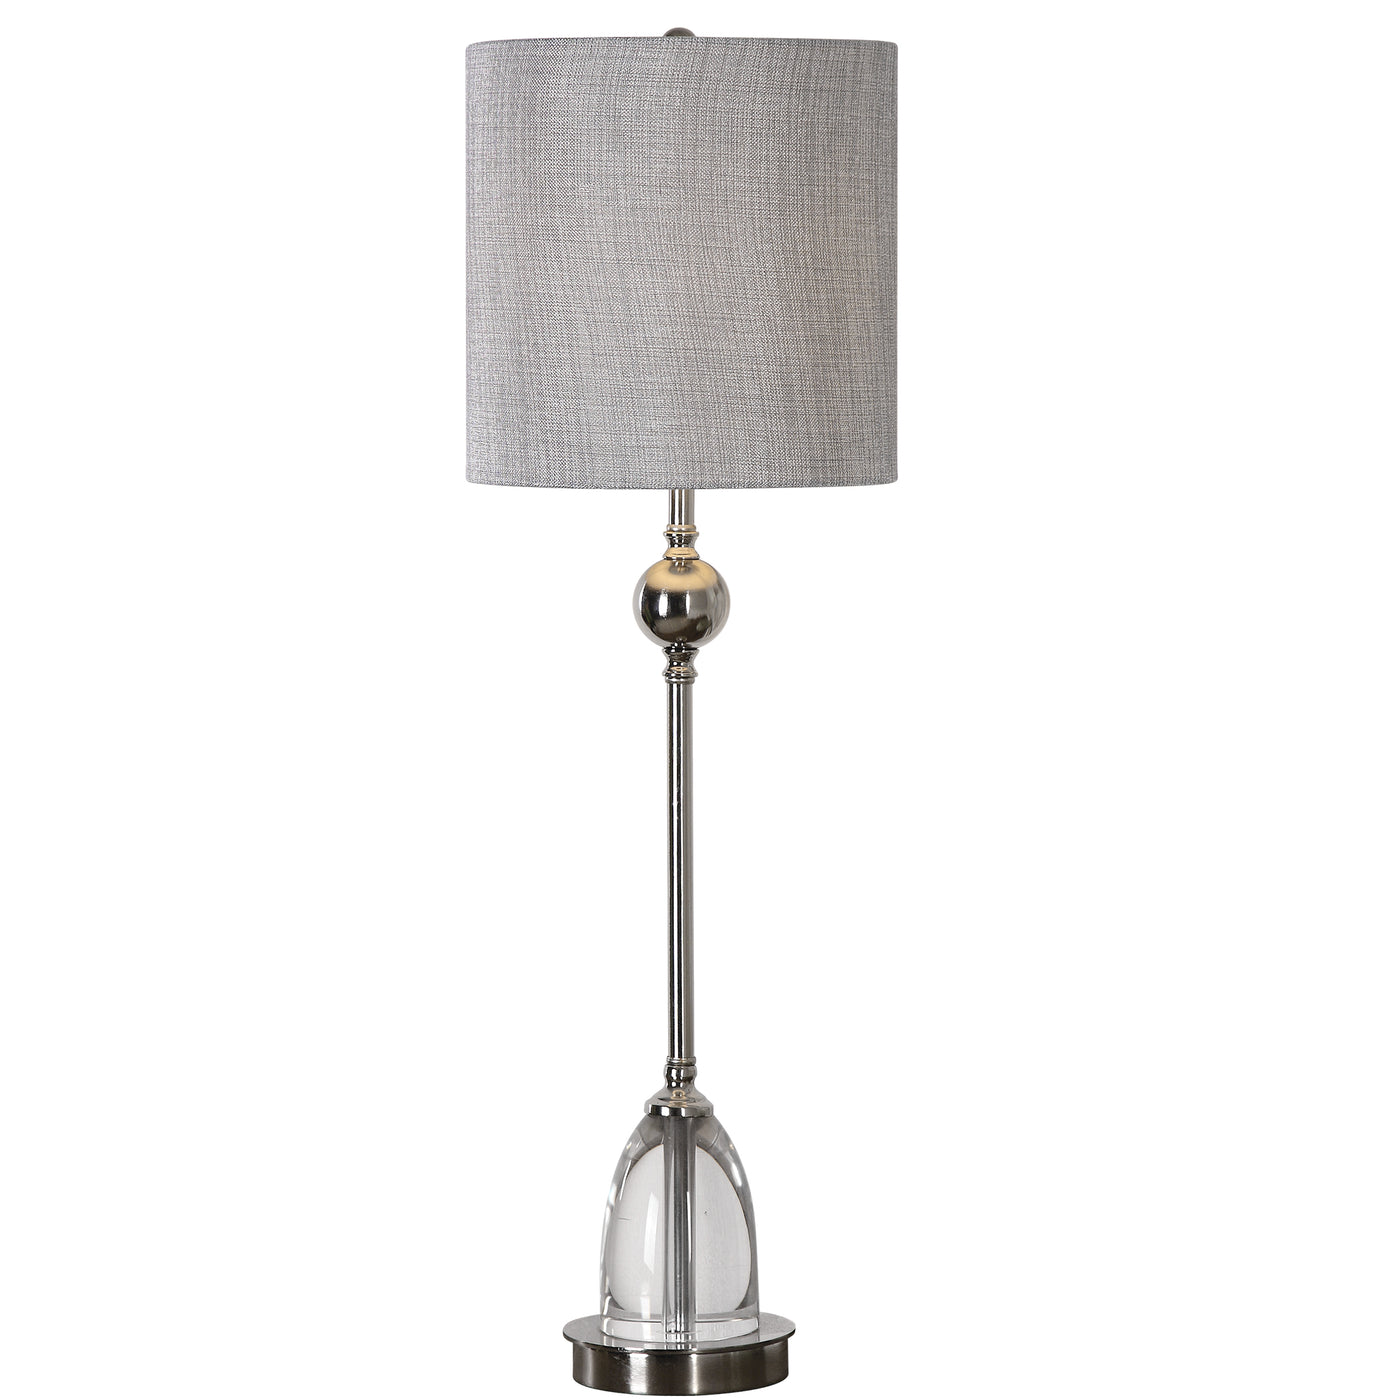 Polished Nickel Plated Steel, Featuring Thick Crystal Detail. The Round Hardback Drum Shade Is A Metallic Silver-gray Line...